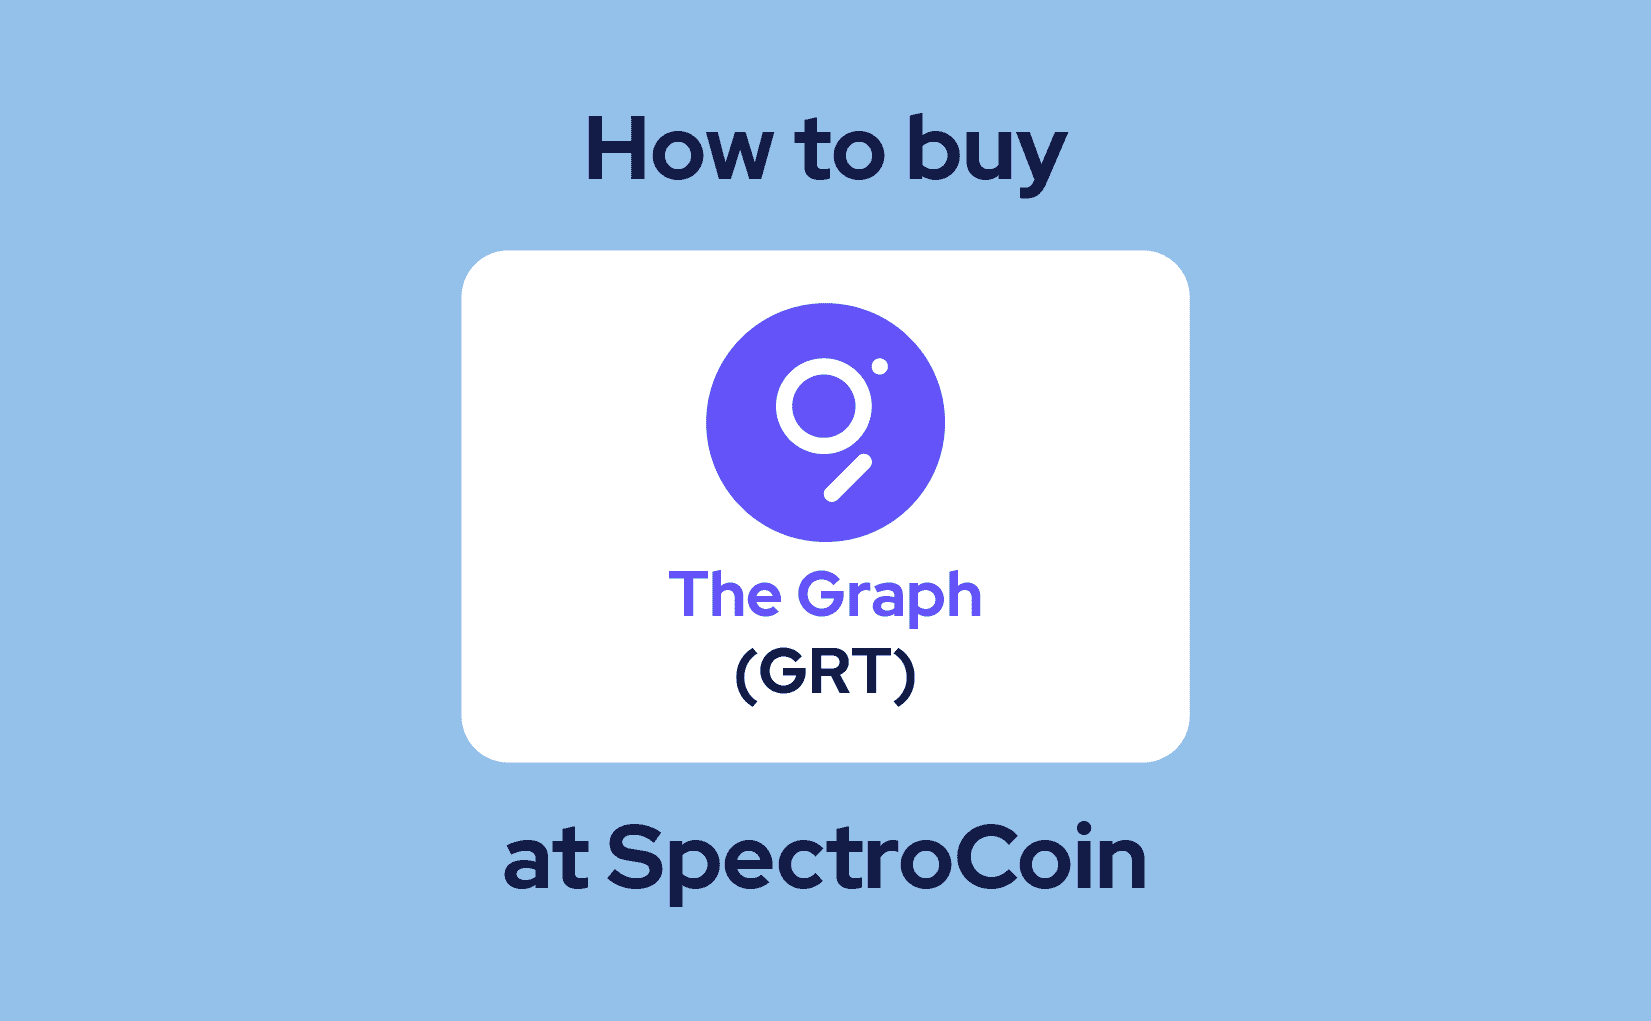 how to buy The Graph